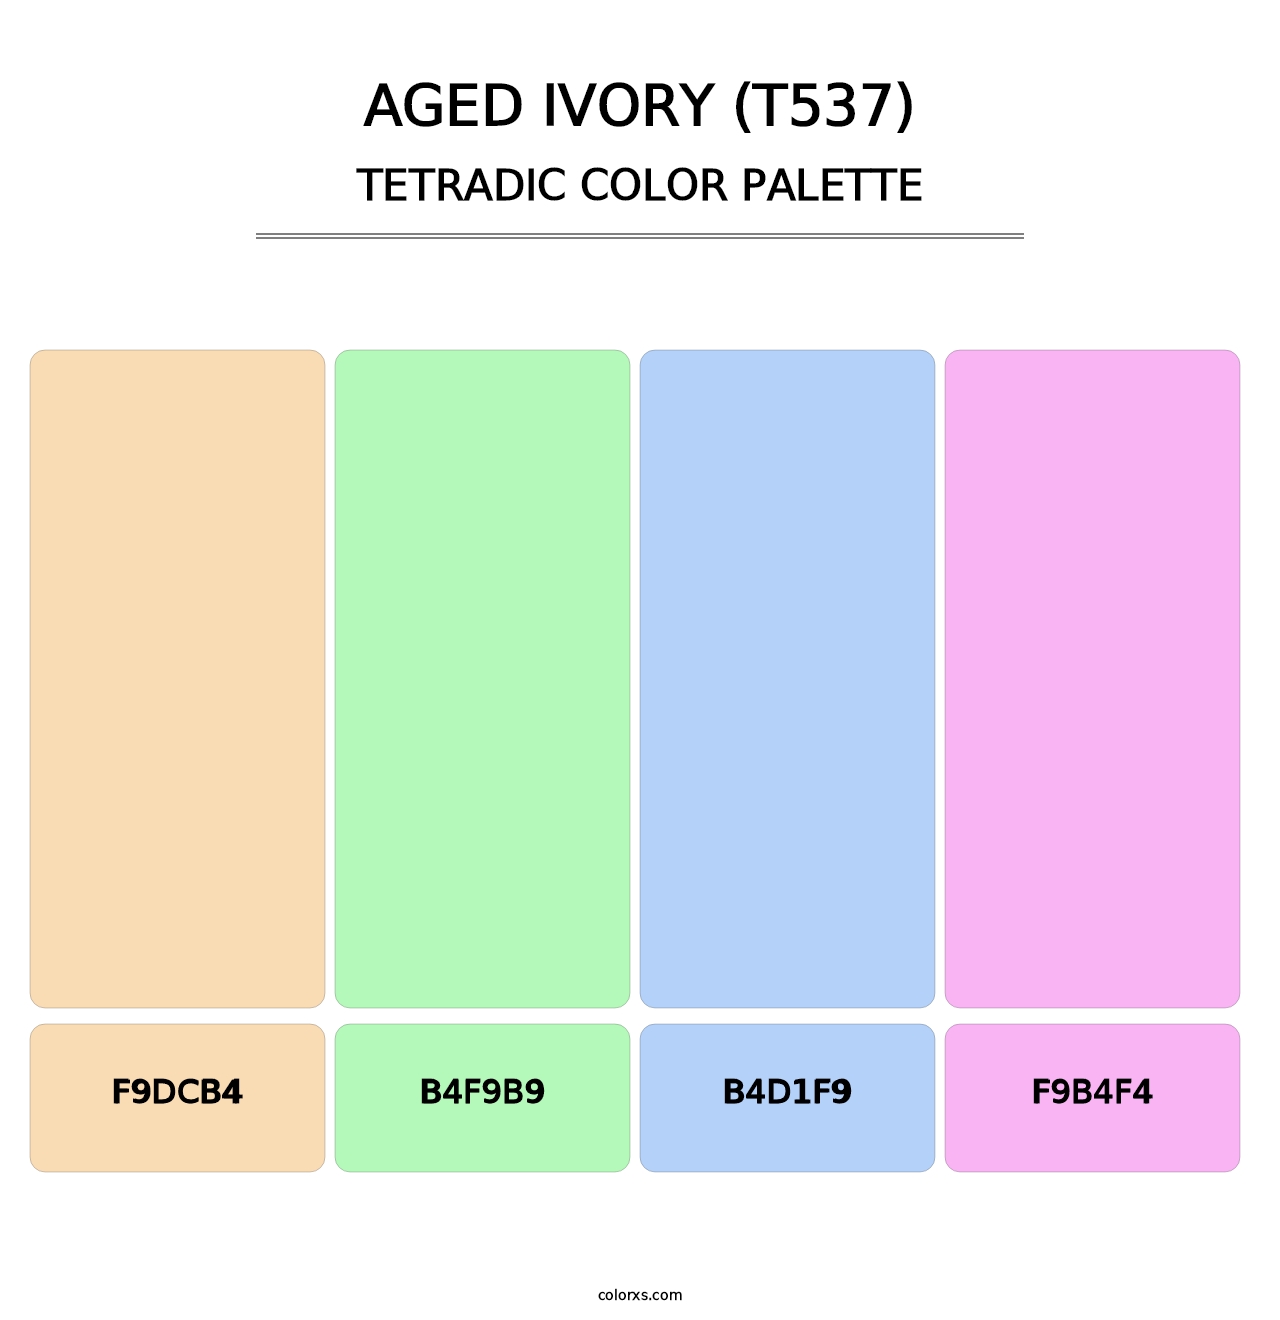 Aged Ivory (T537) - Tetradic Color Palette